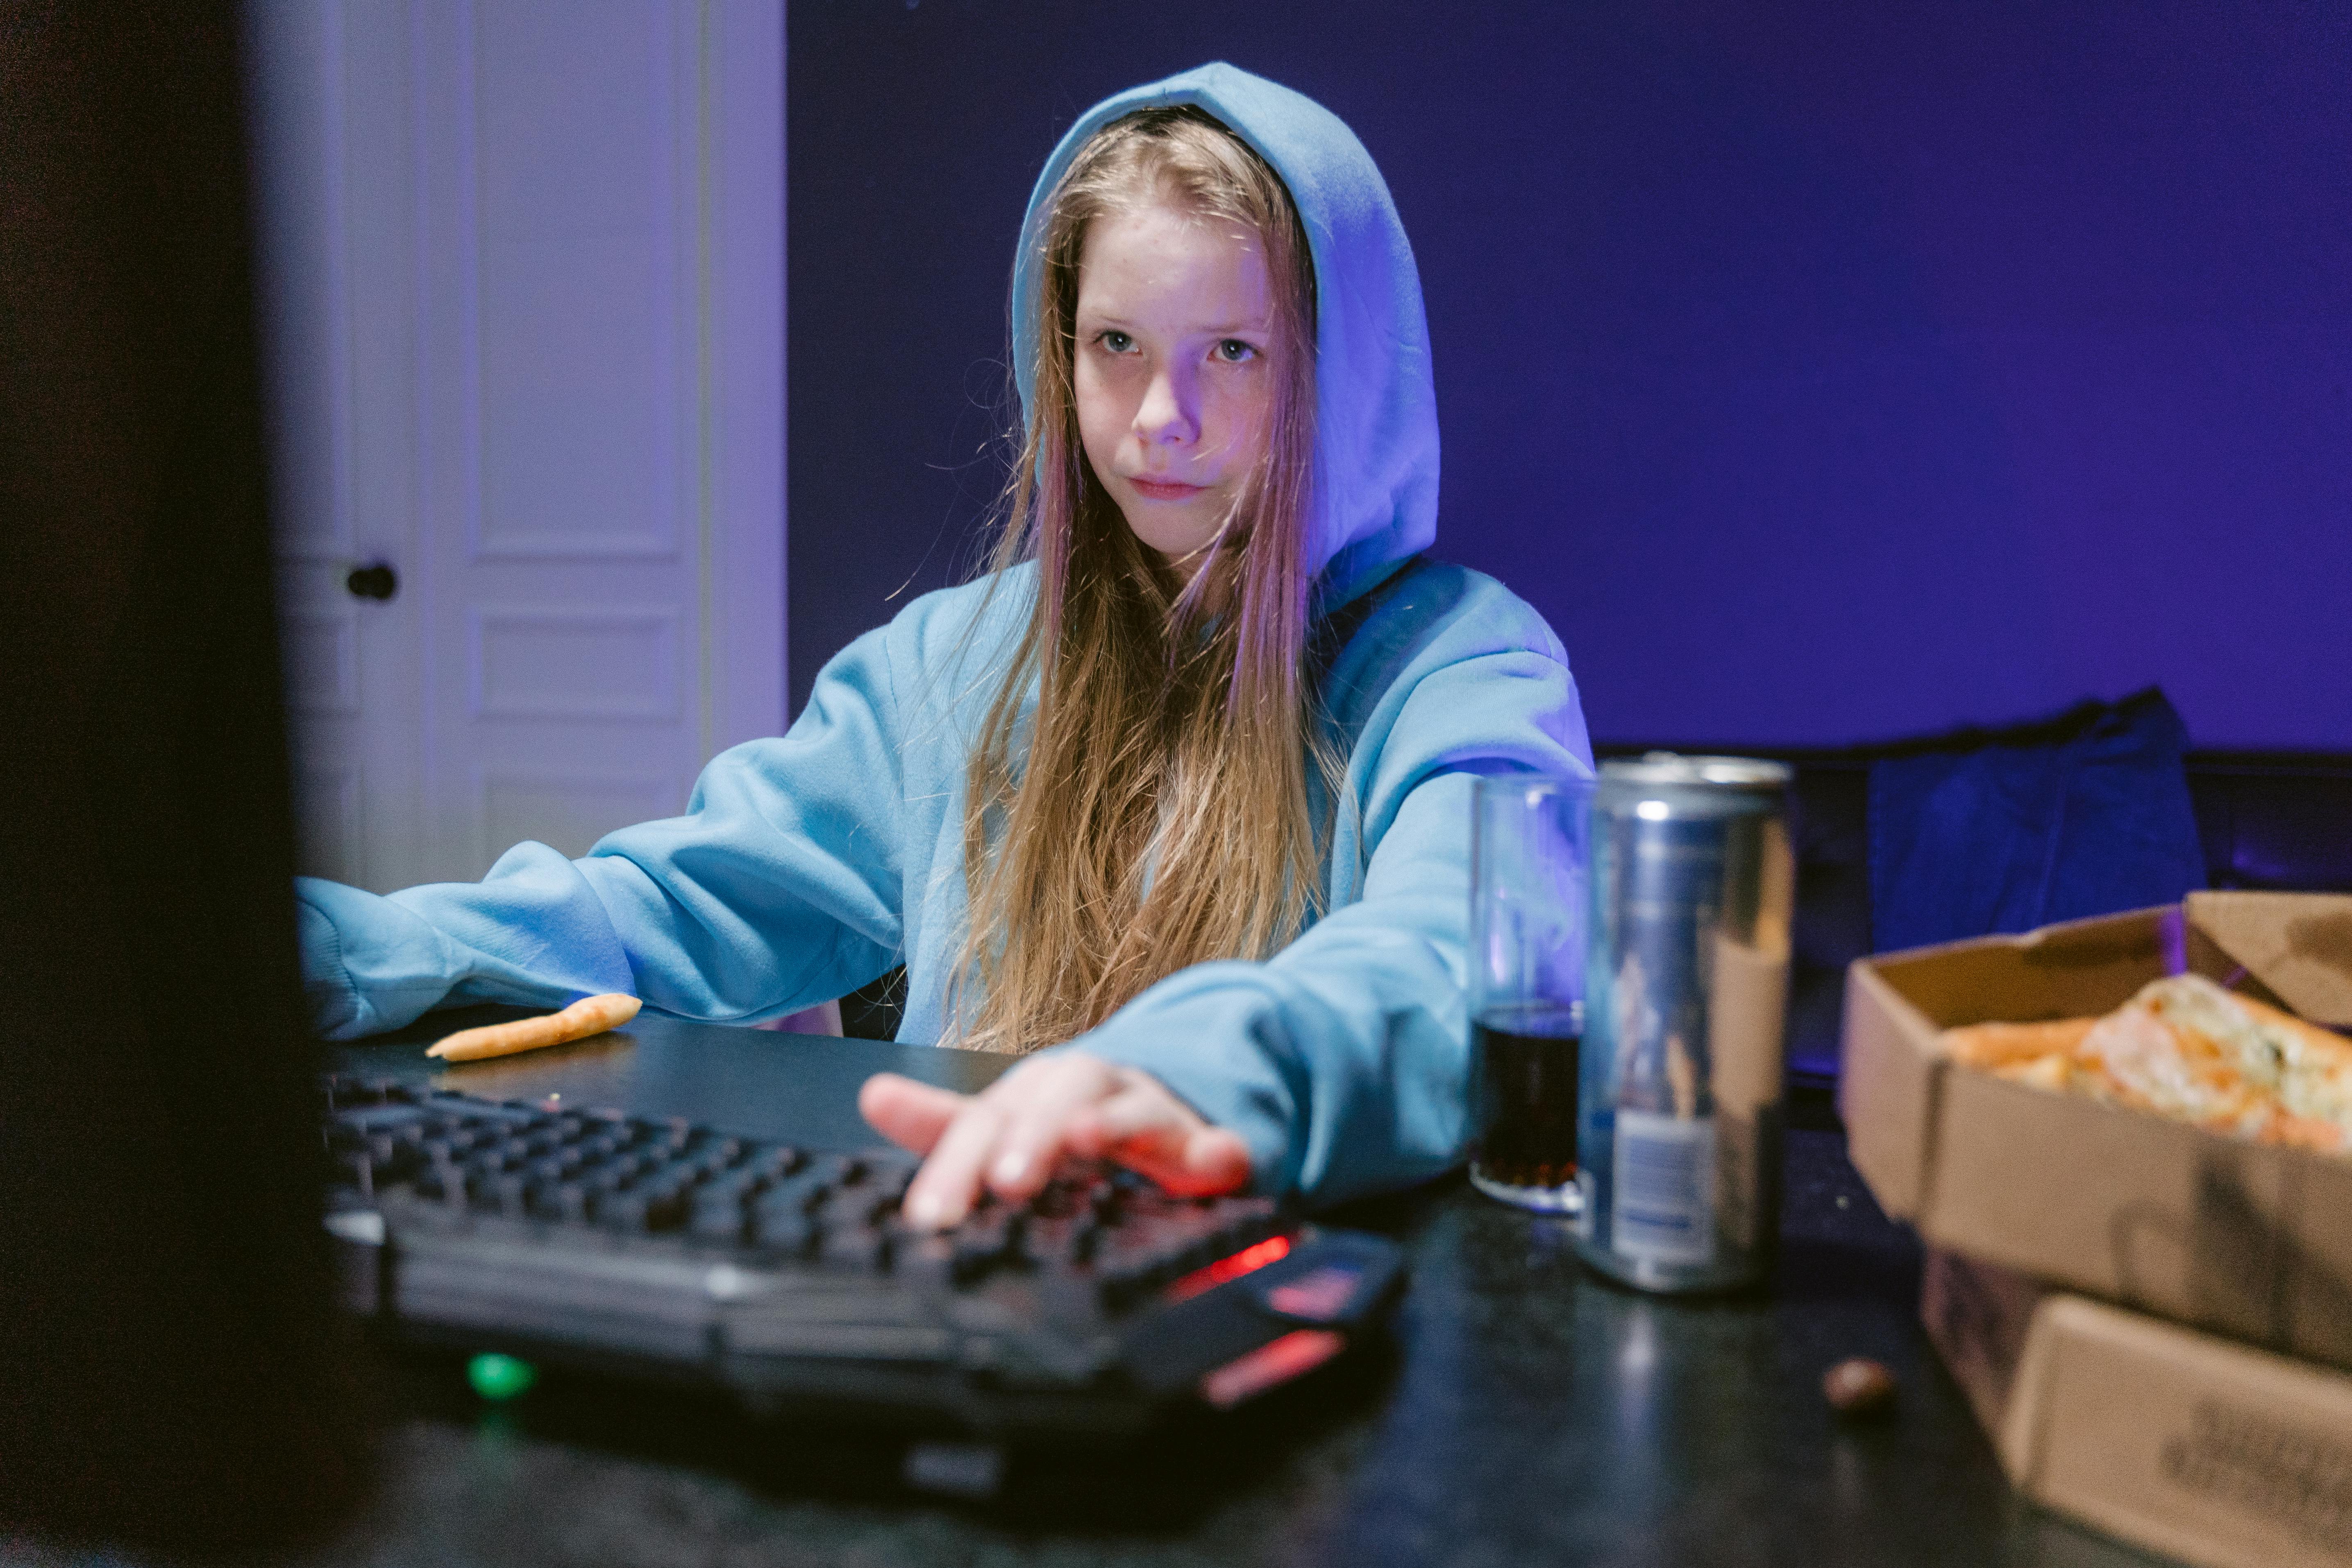 A girl using a computer in her room with beverages and food on hand | Source: Pexels